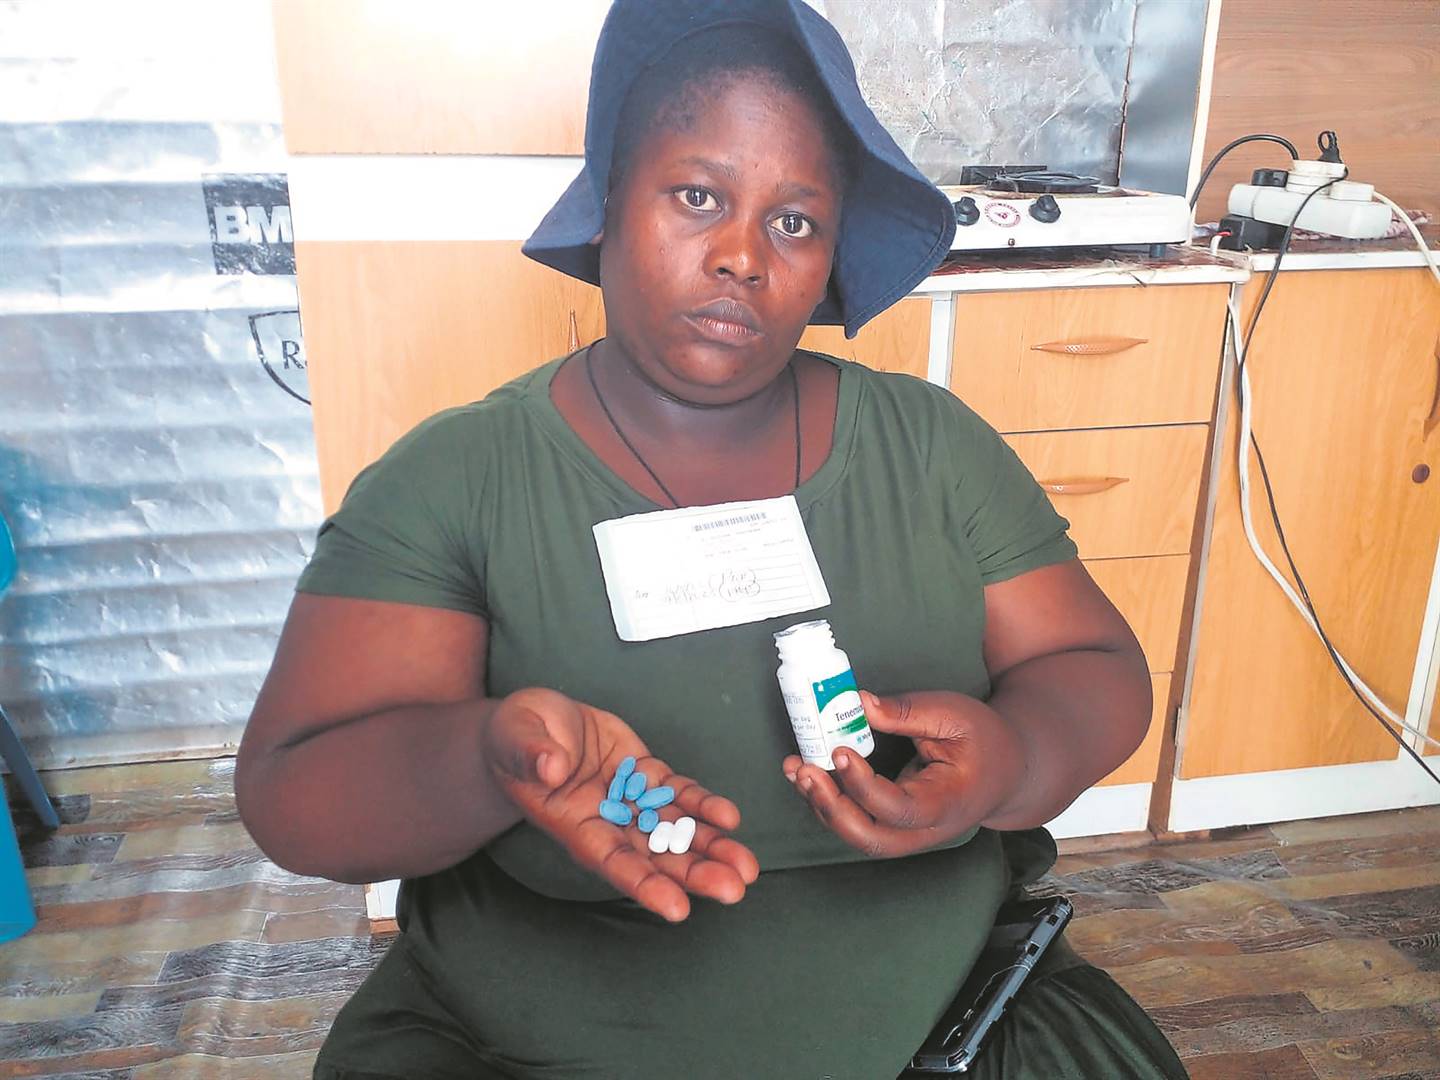 Clinic Horror: "They Gave Me ARVs, But I'm HIV Negative"